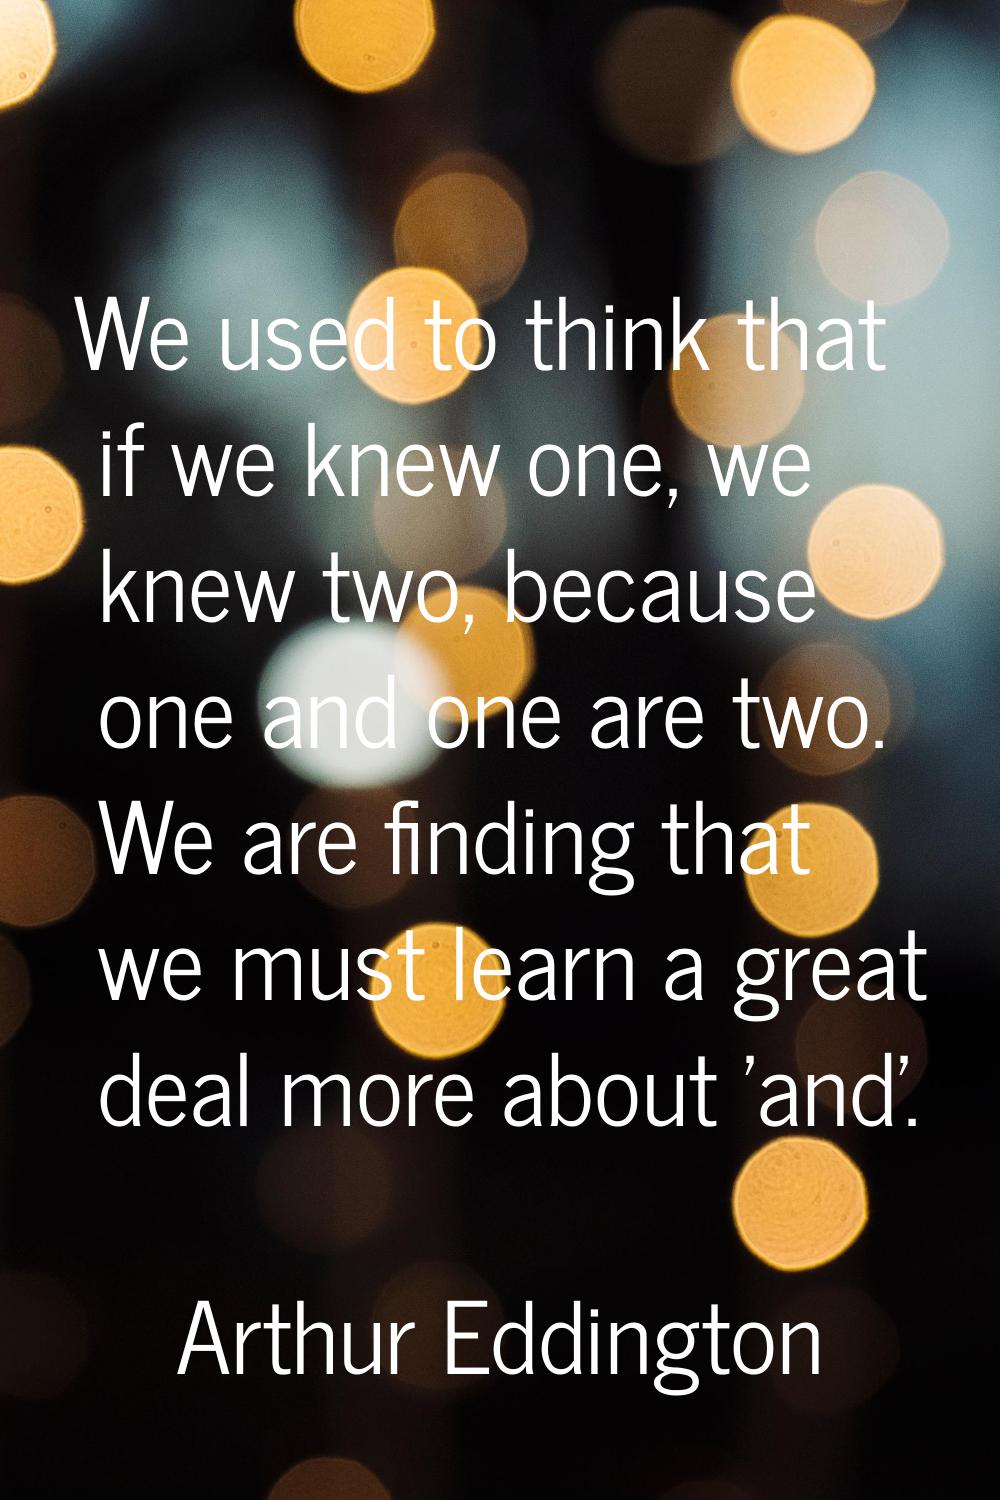 We used to think that if we knew one, we knew two, because one and one are two. We are finding that